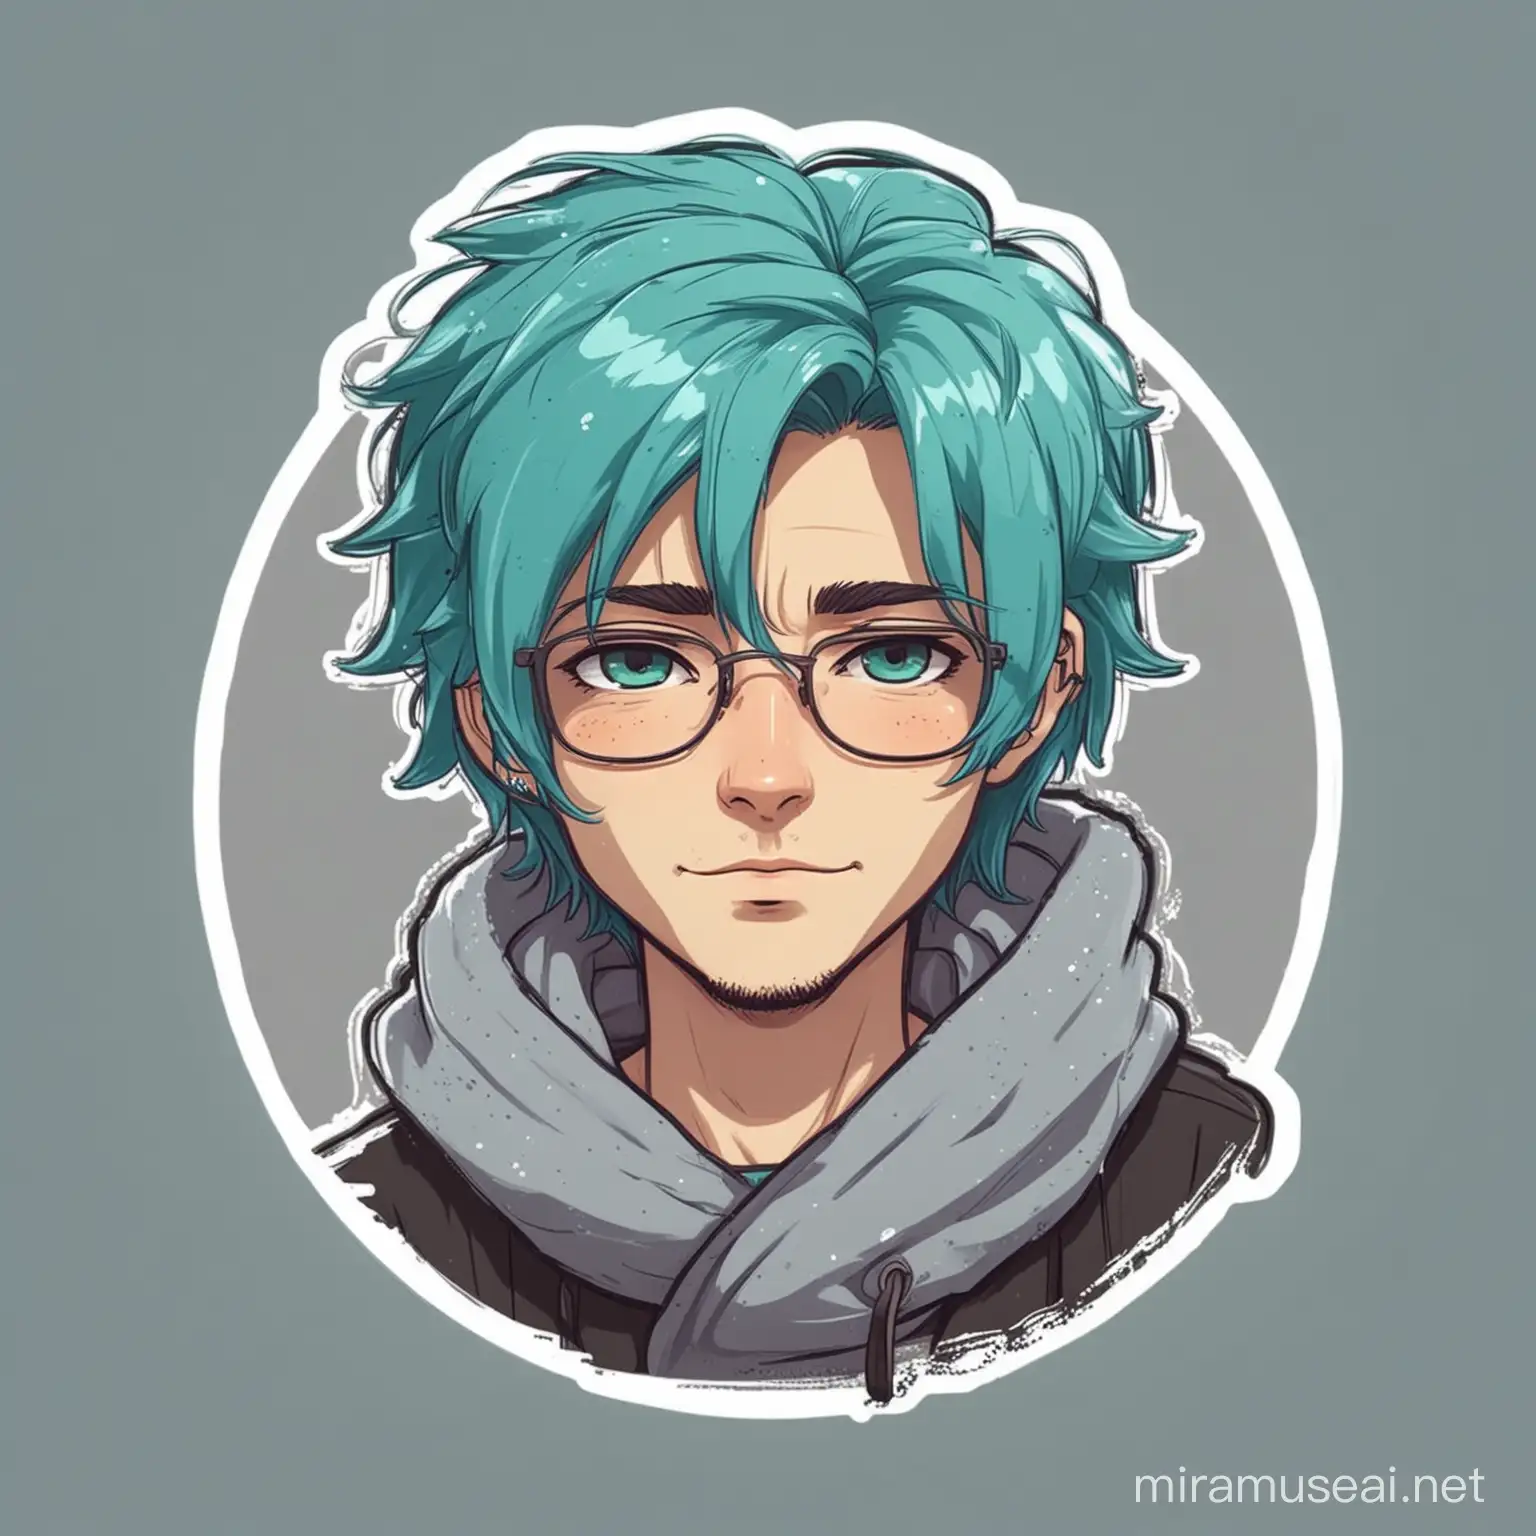 cozy man, cartoon sticker style, high level detail, teal colored hair